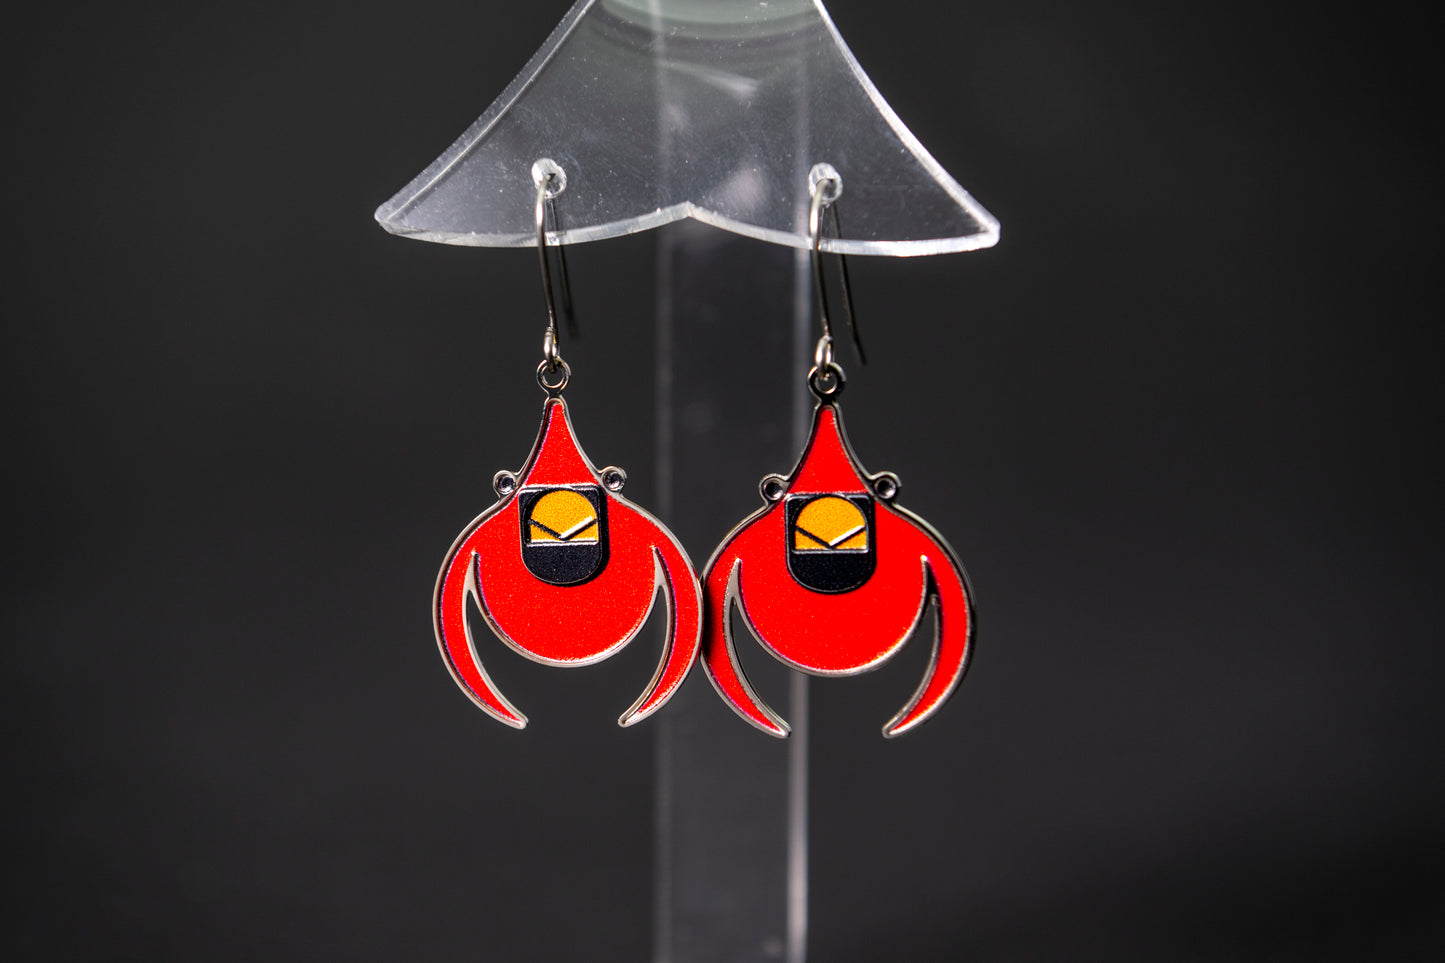 Cardinal Earrings by Charley Harper from David Howell & Co.